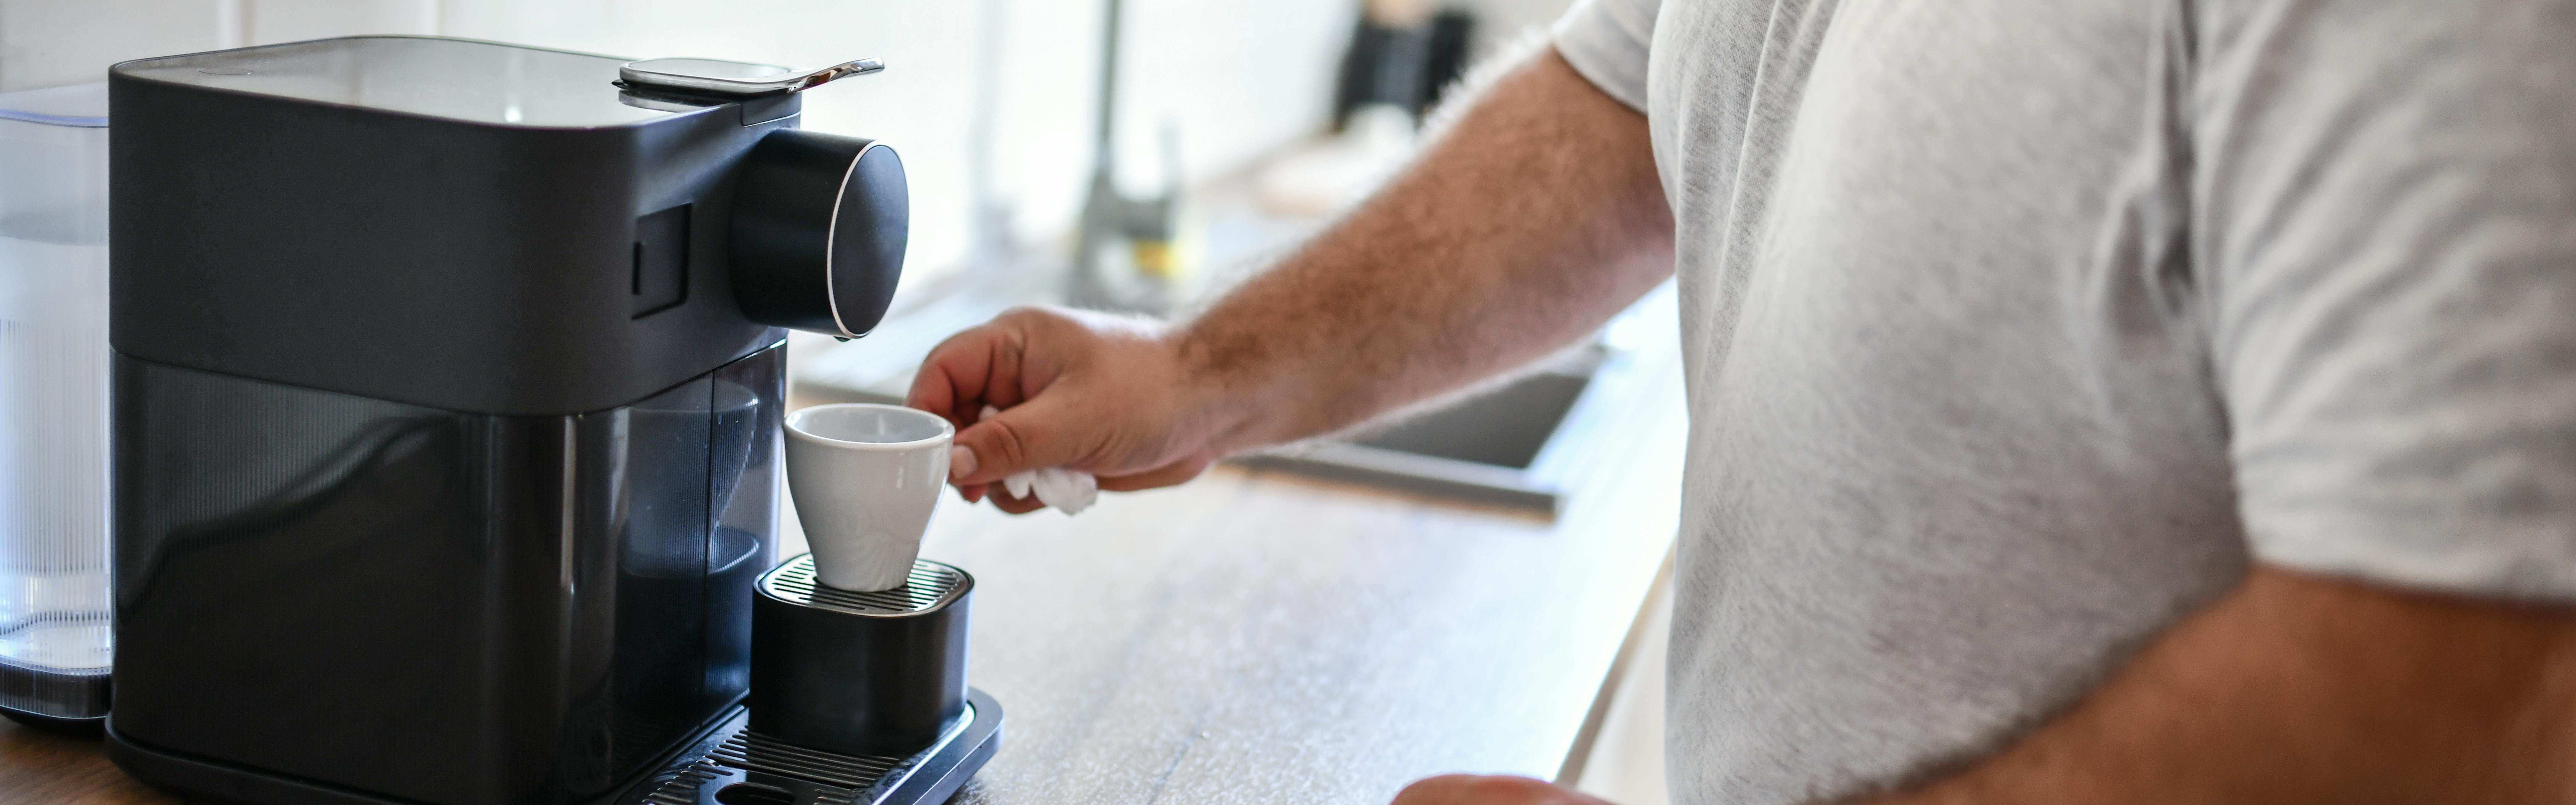 How to Buy the Best Espresso Machine for You